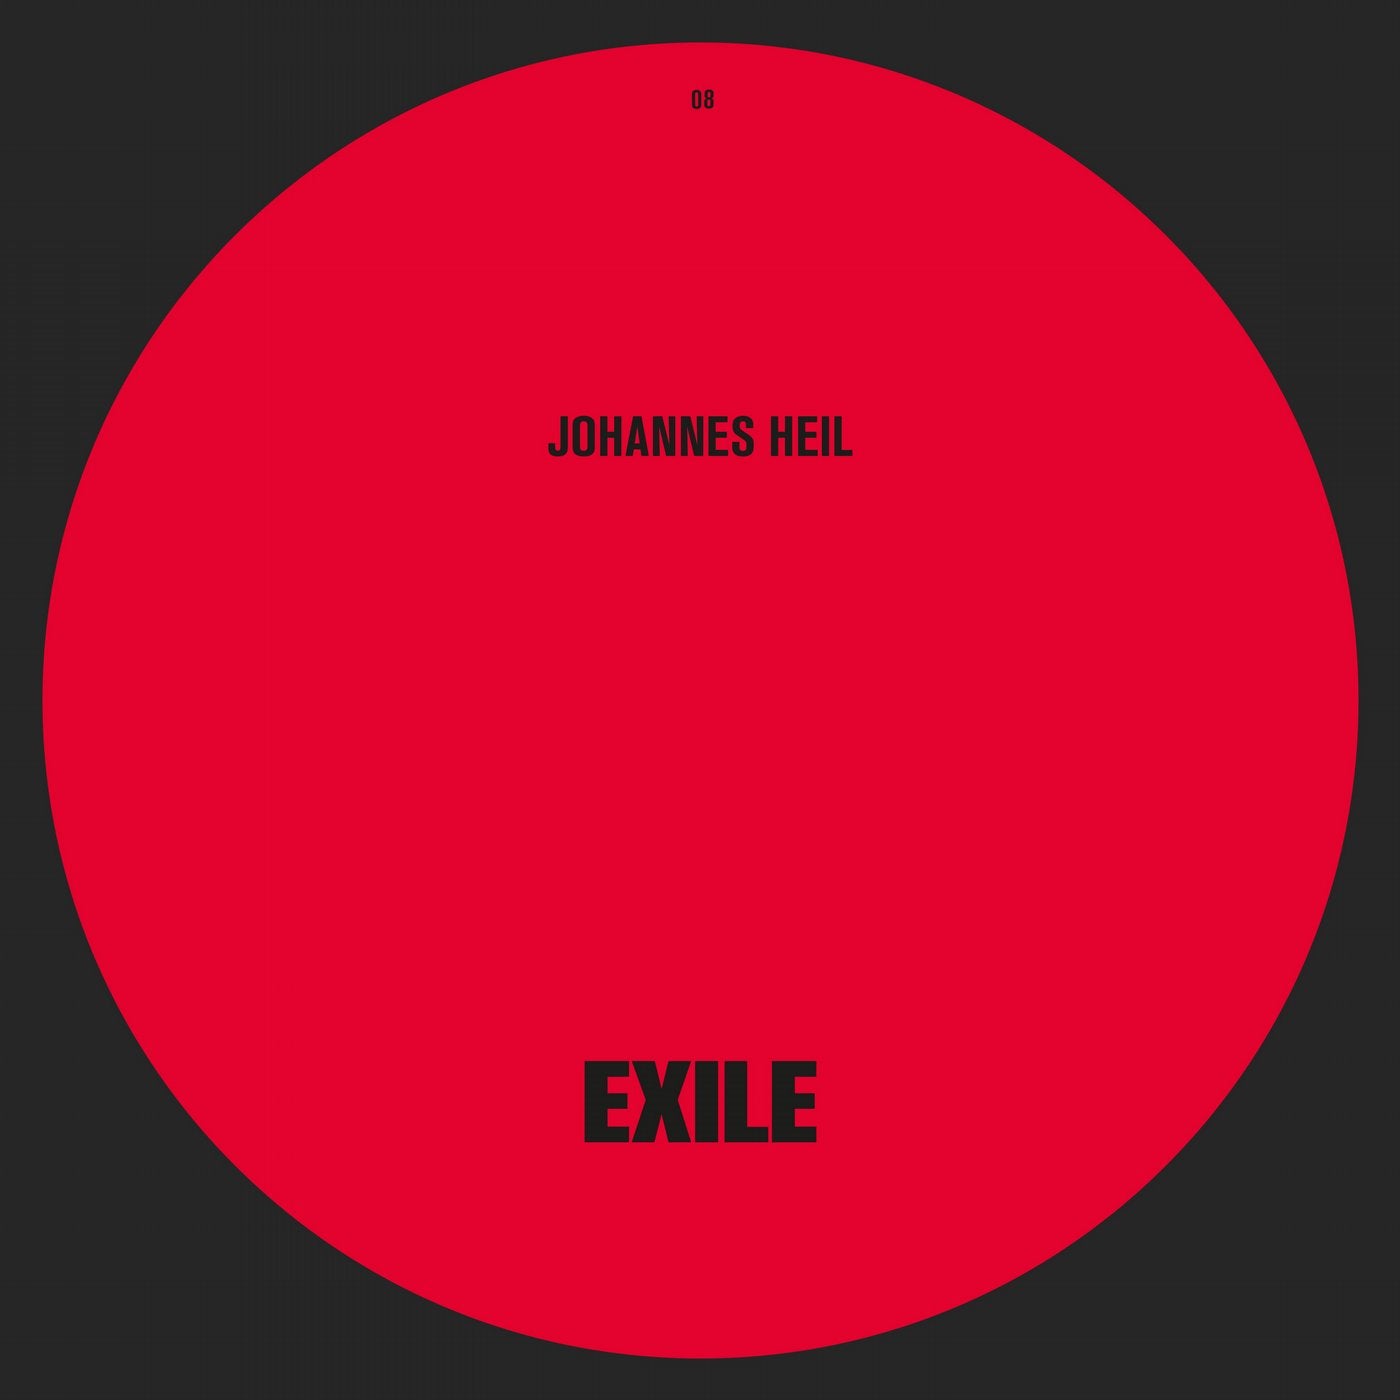 EXILE 008